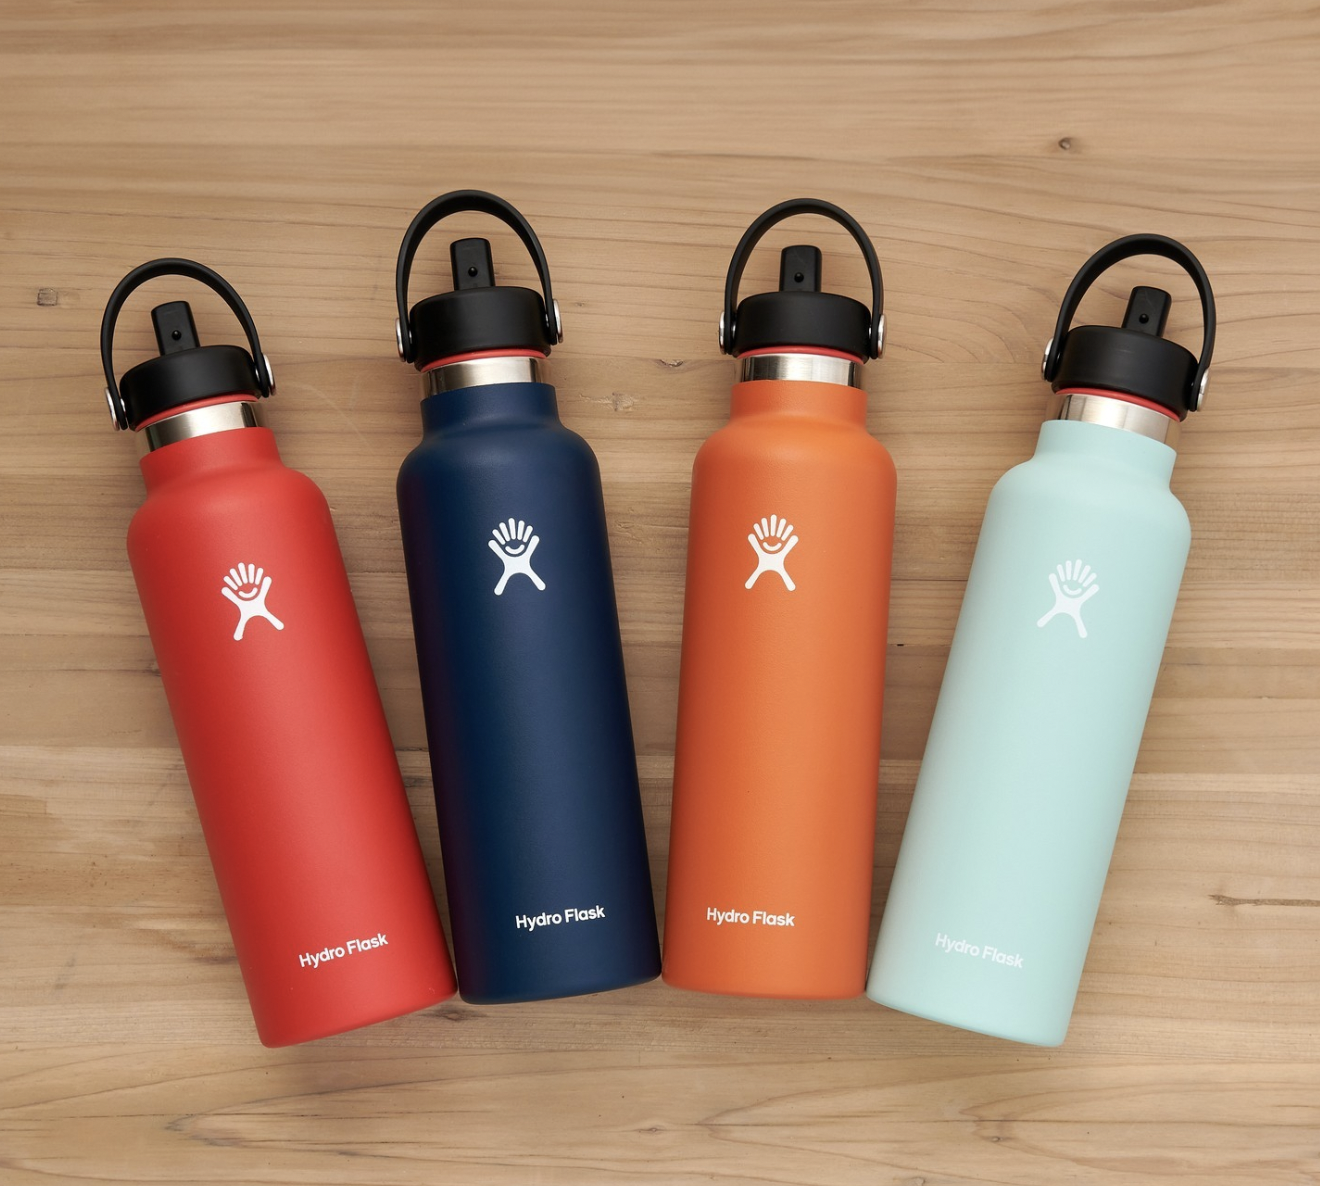 An assortment of custom branded Hydro Flask bottles by Swagger.